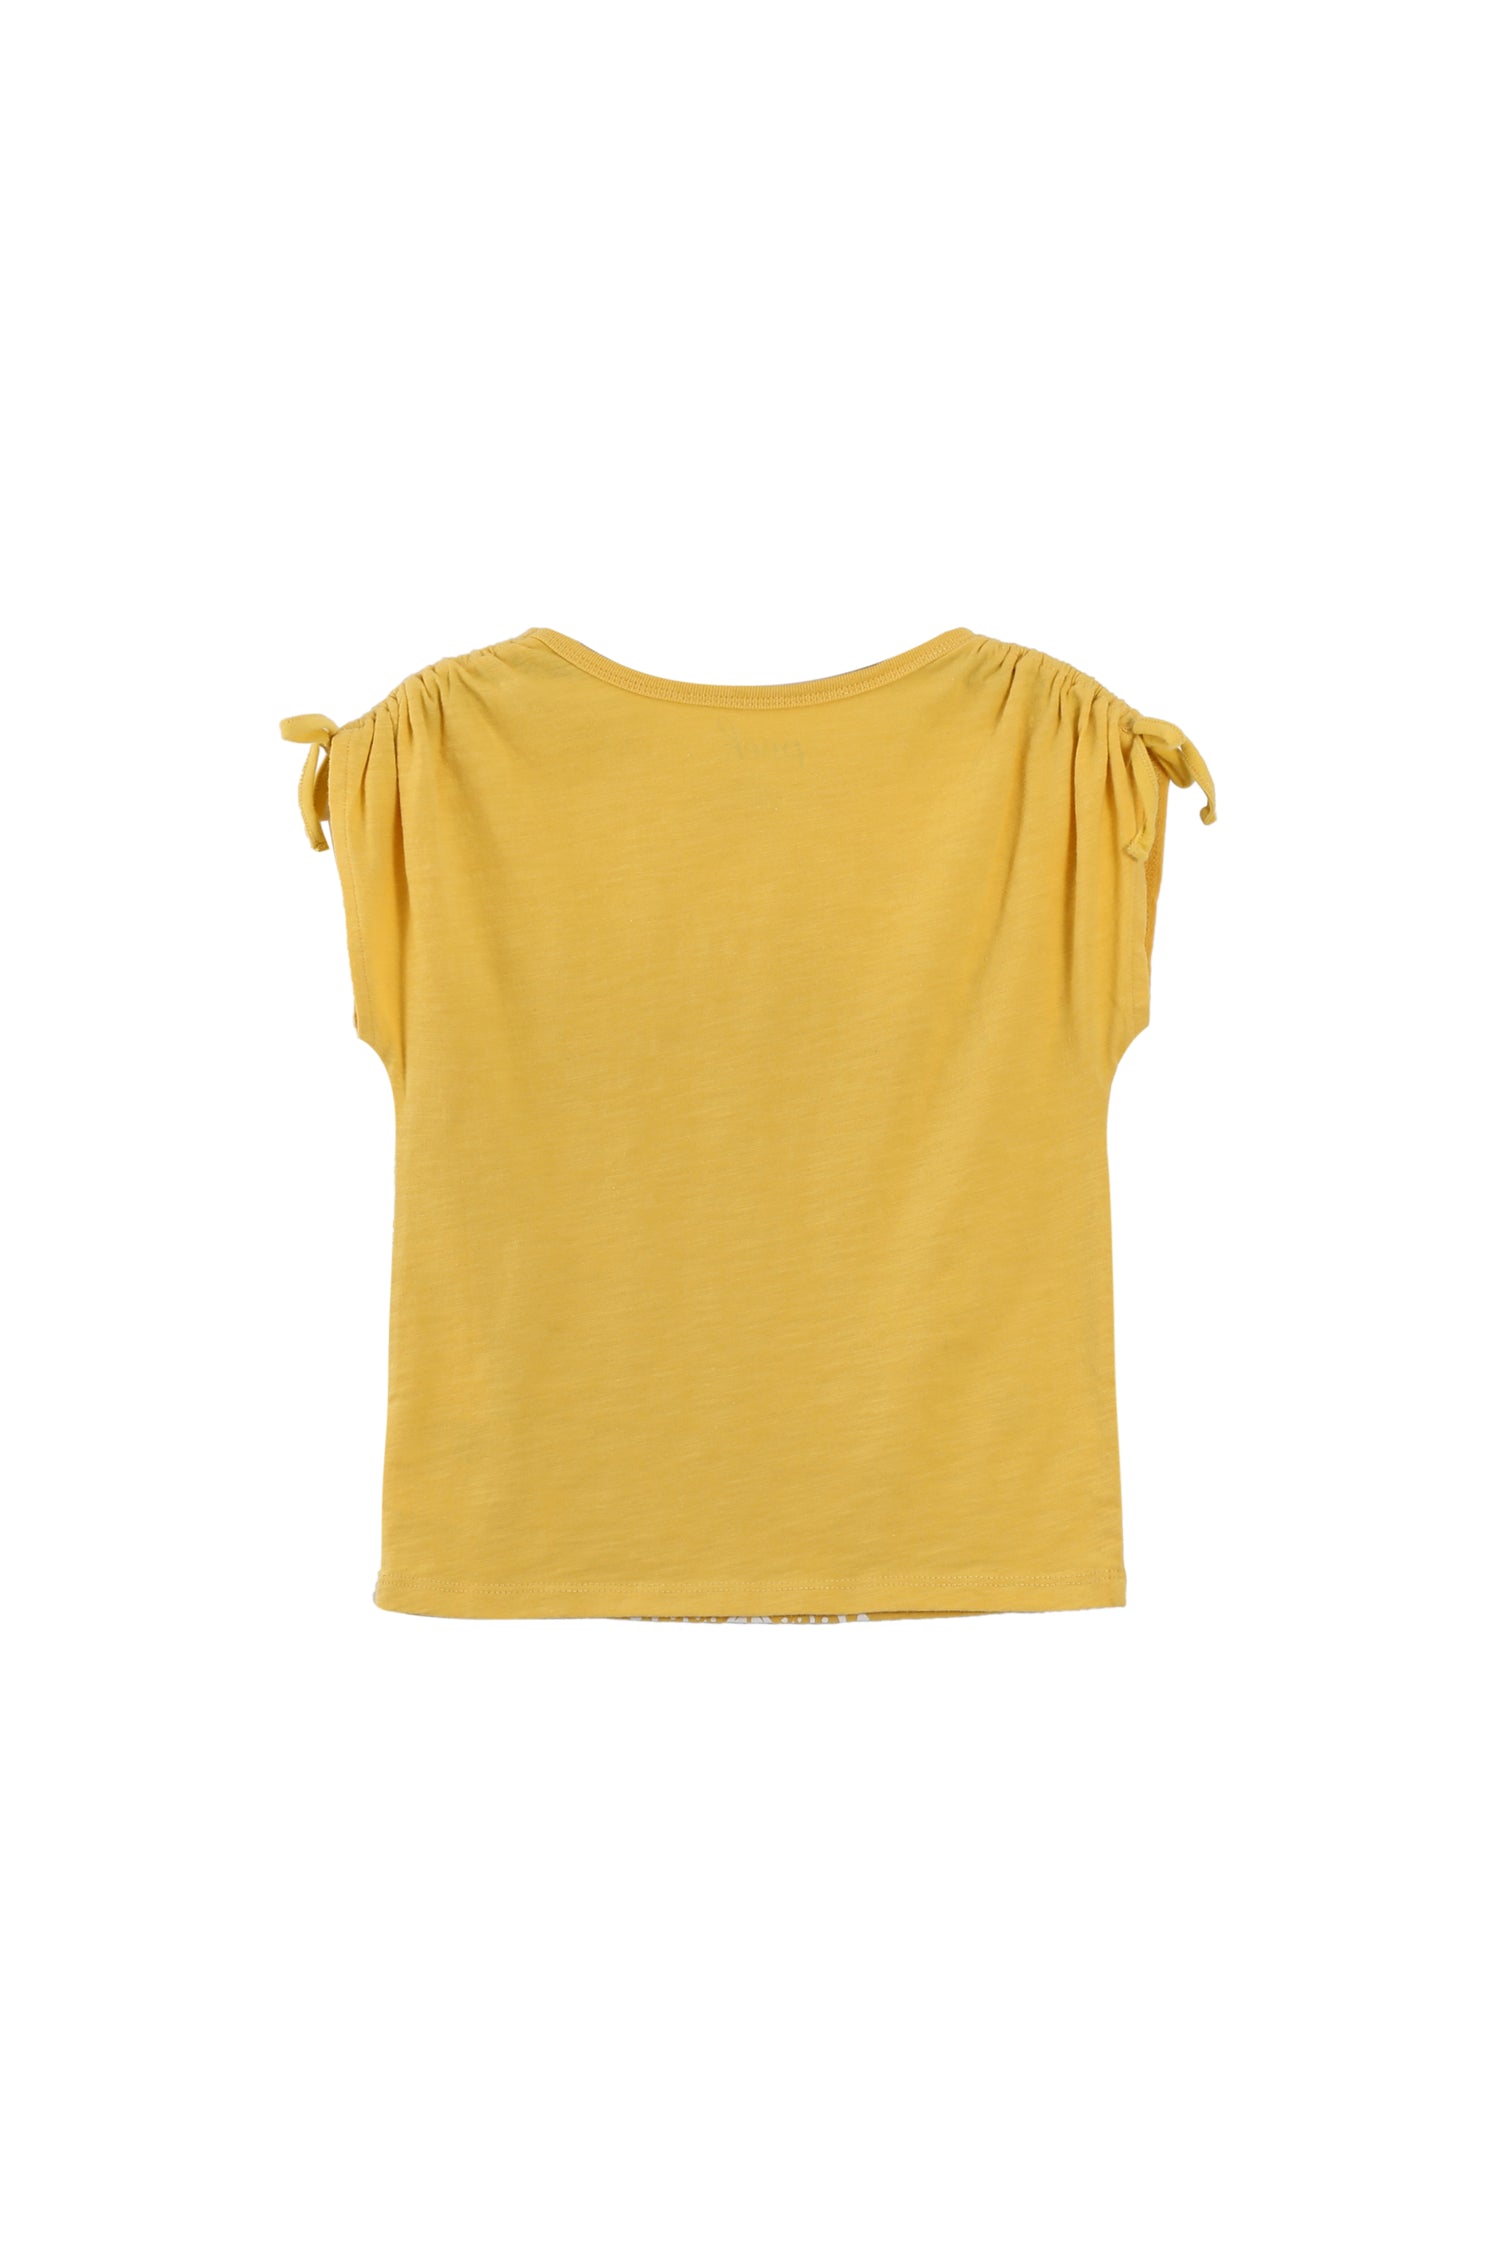 BACK OF YELLOW RUCHED SLEEVE TOP